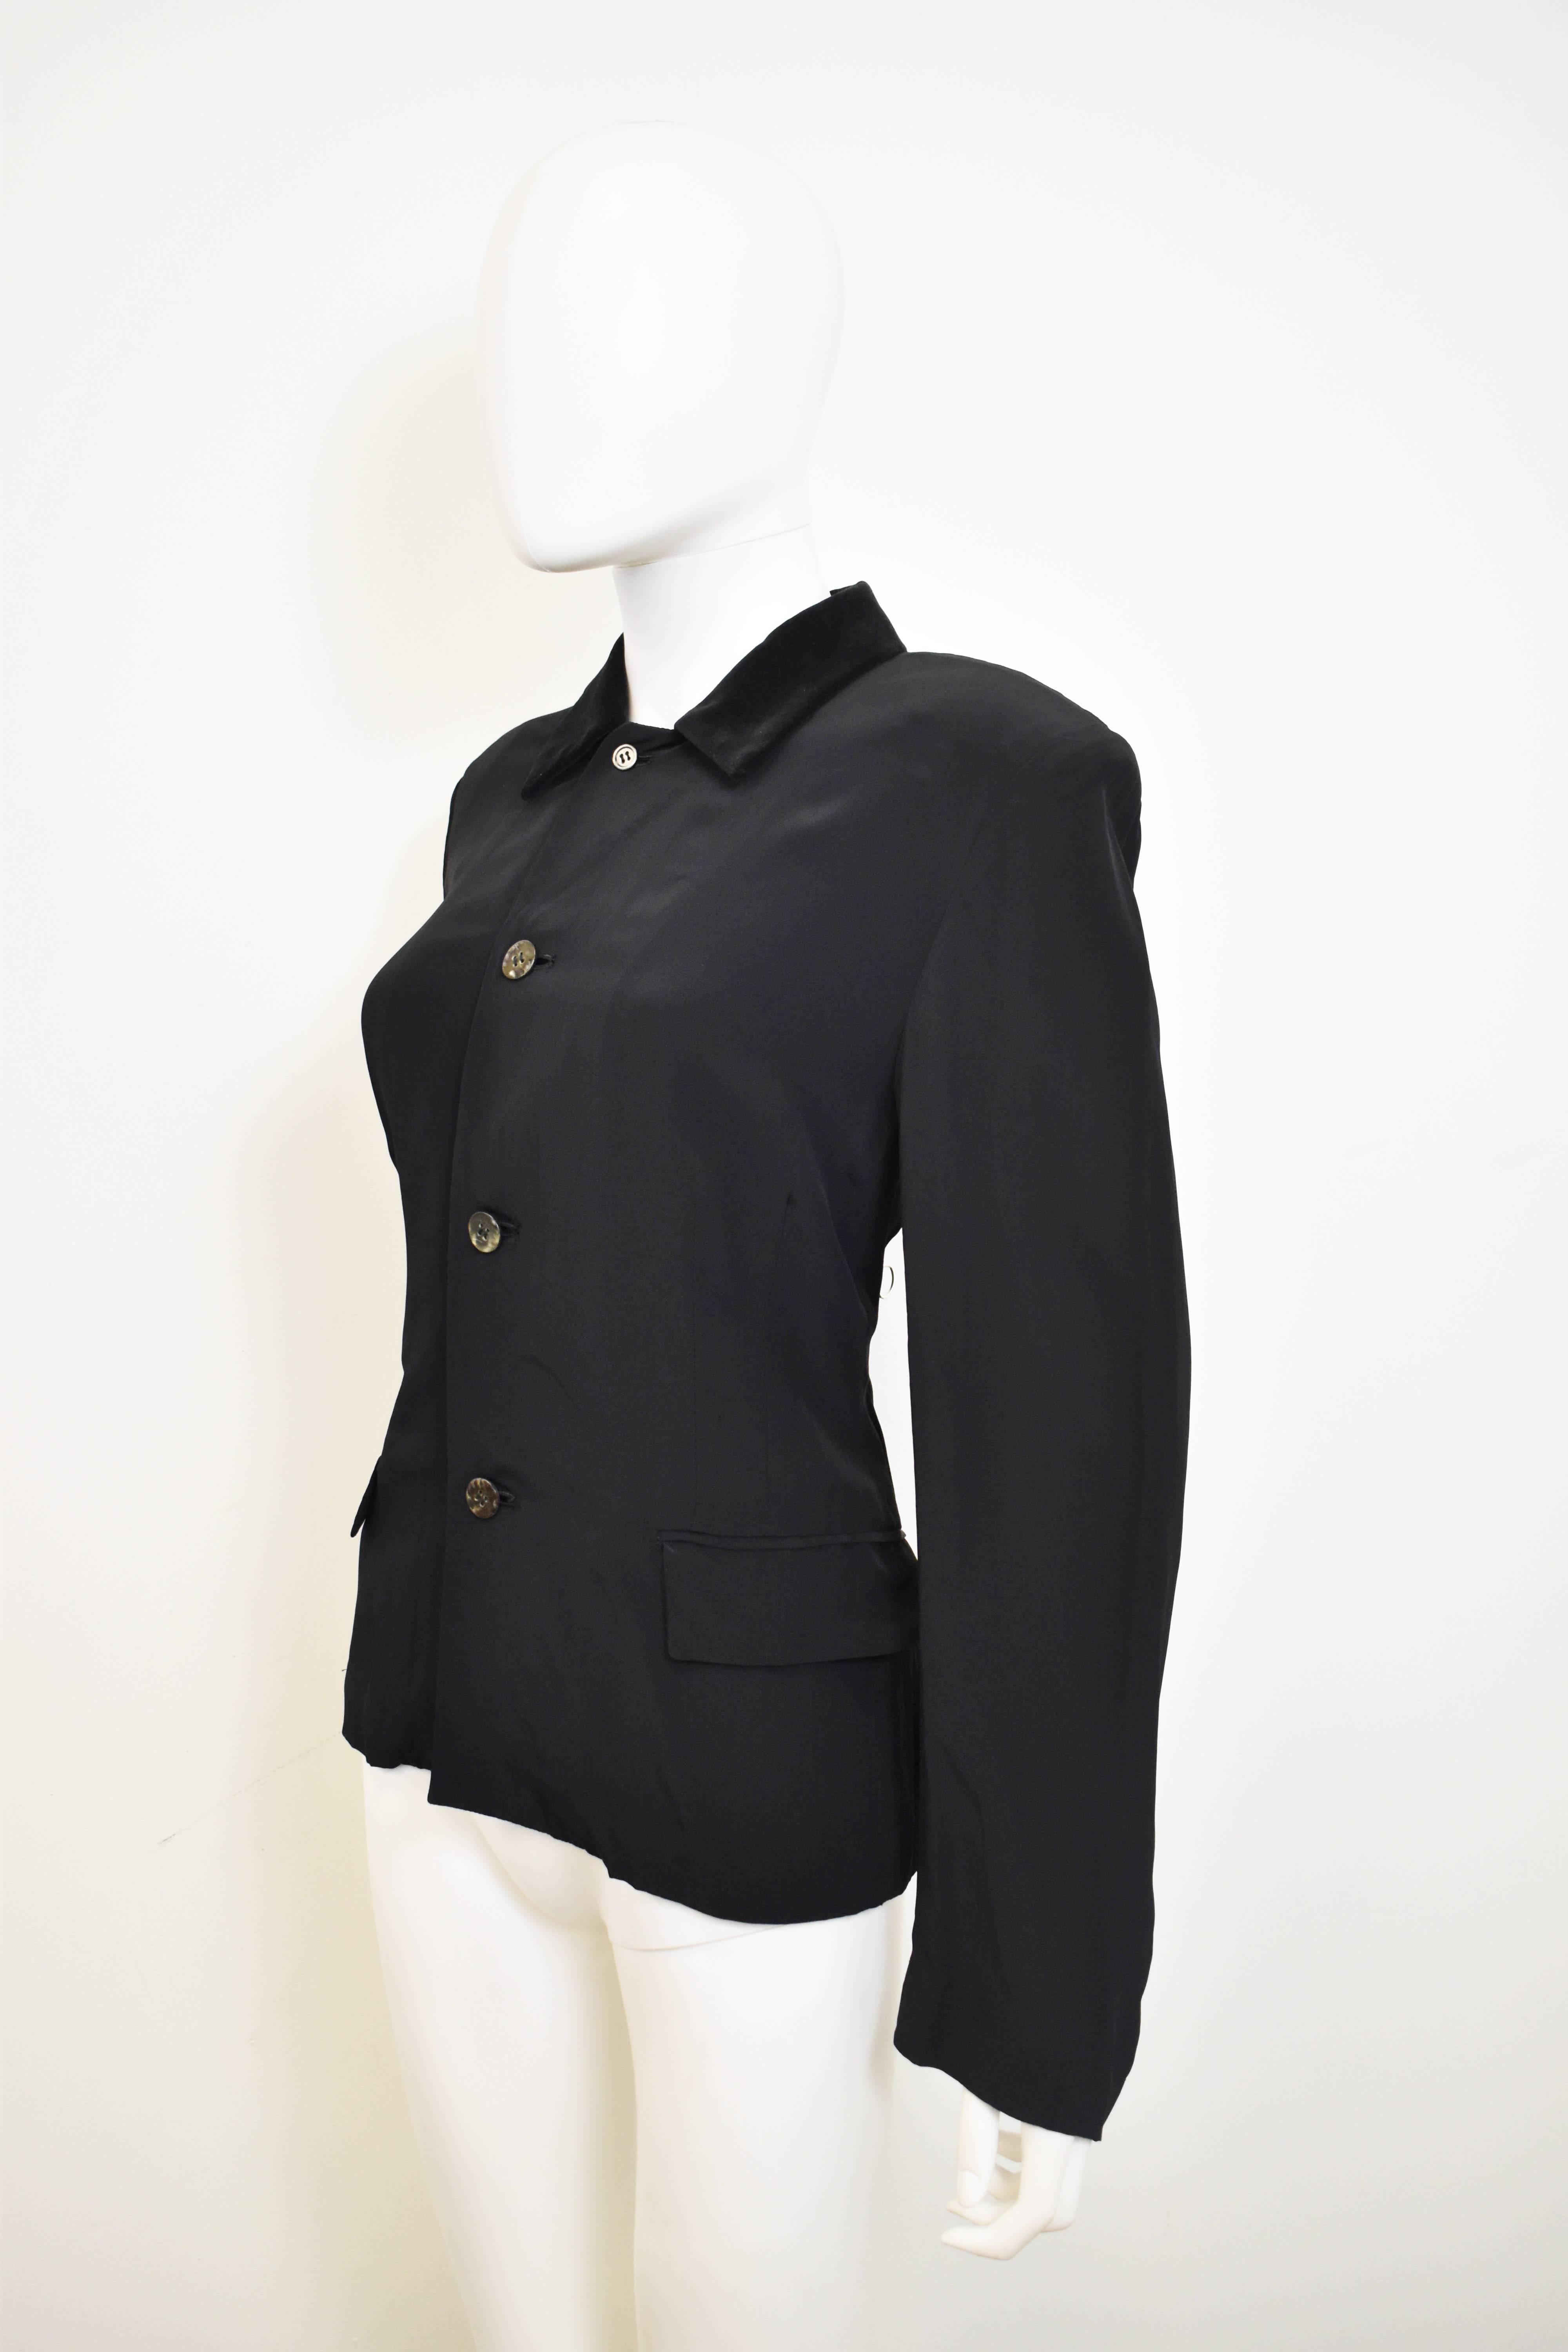 A black fitted shirt with contrast velvet collar from Comme des Garcons’ diffusion line Robe de Chambre. The shirt has a jacket-like design with a slim shape, a fitted waist, light padding in the shoulders, pockets at the waist and slight flare to